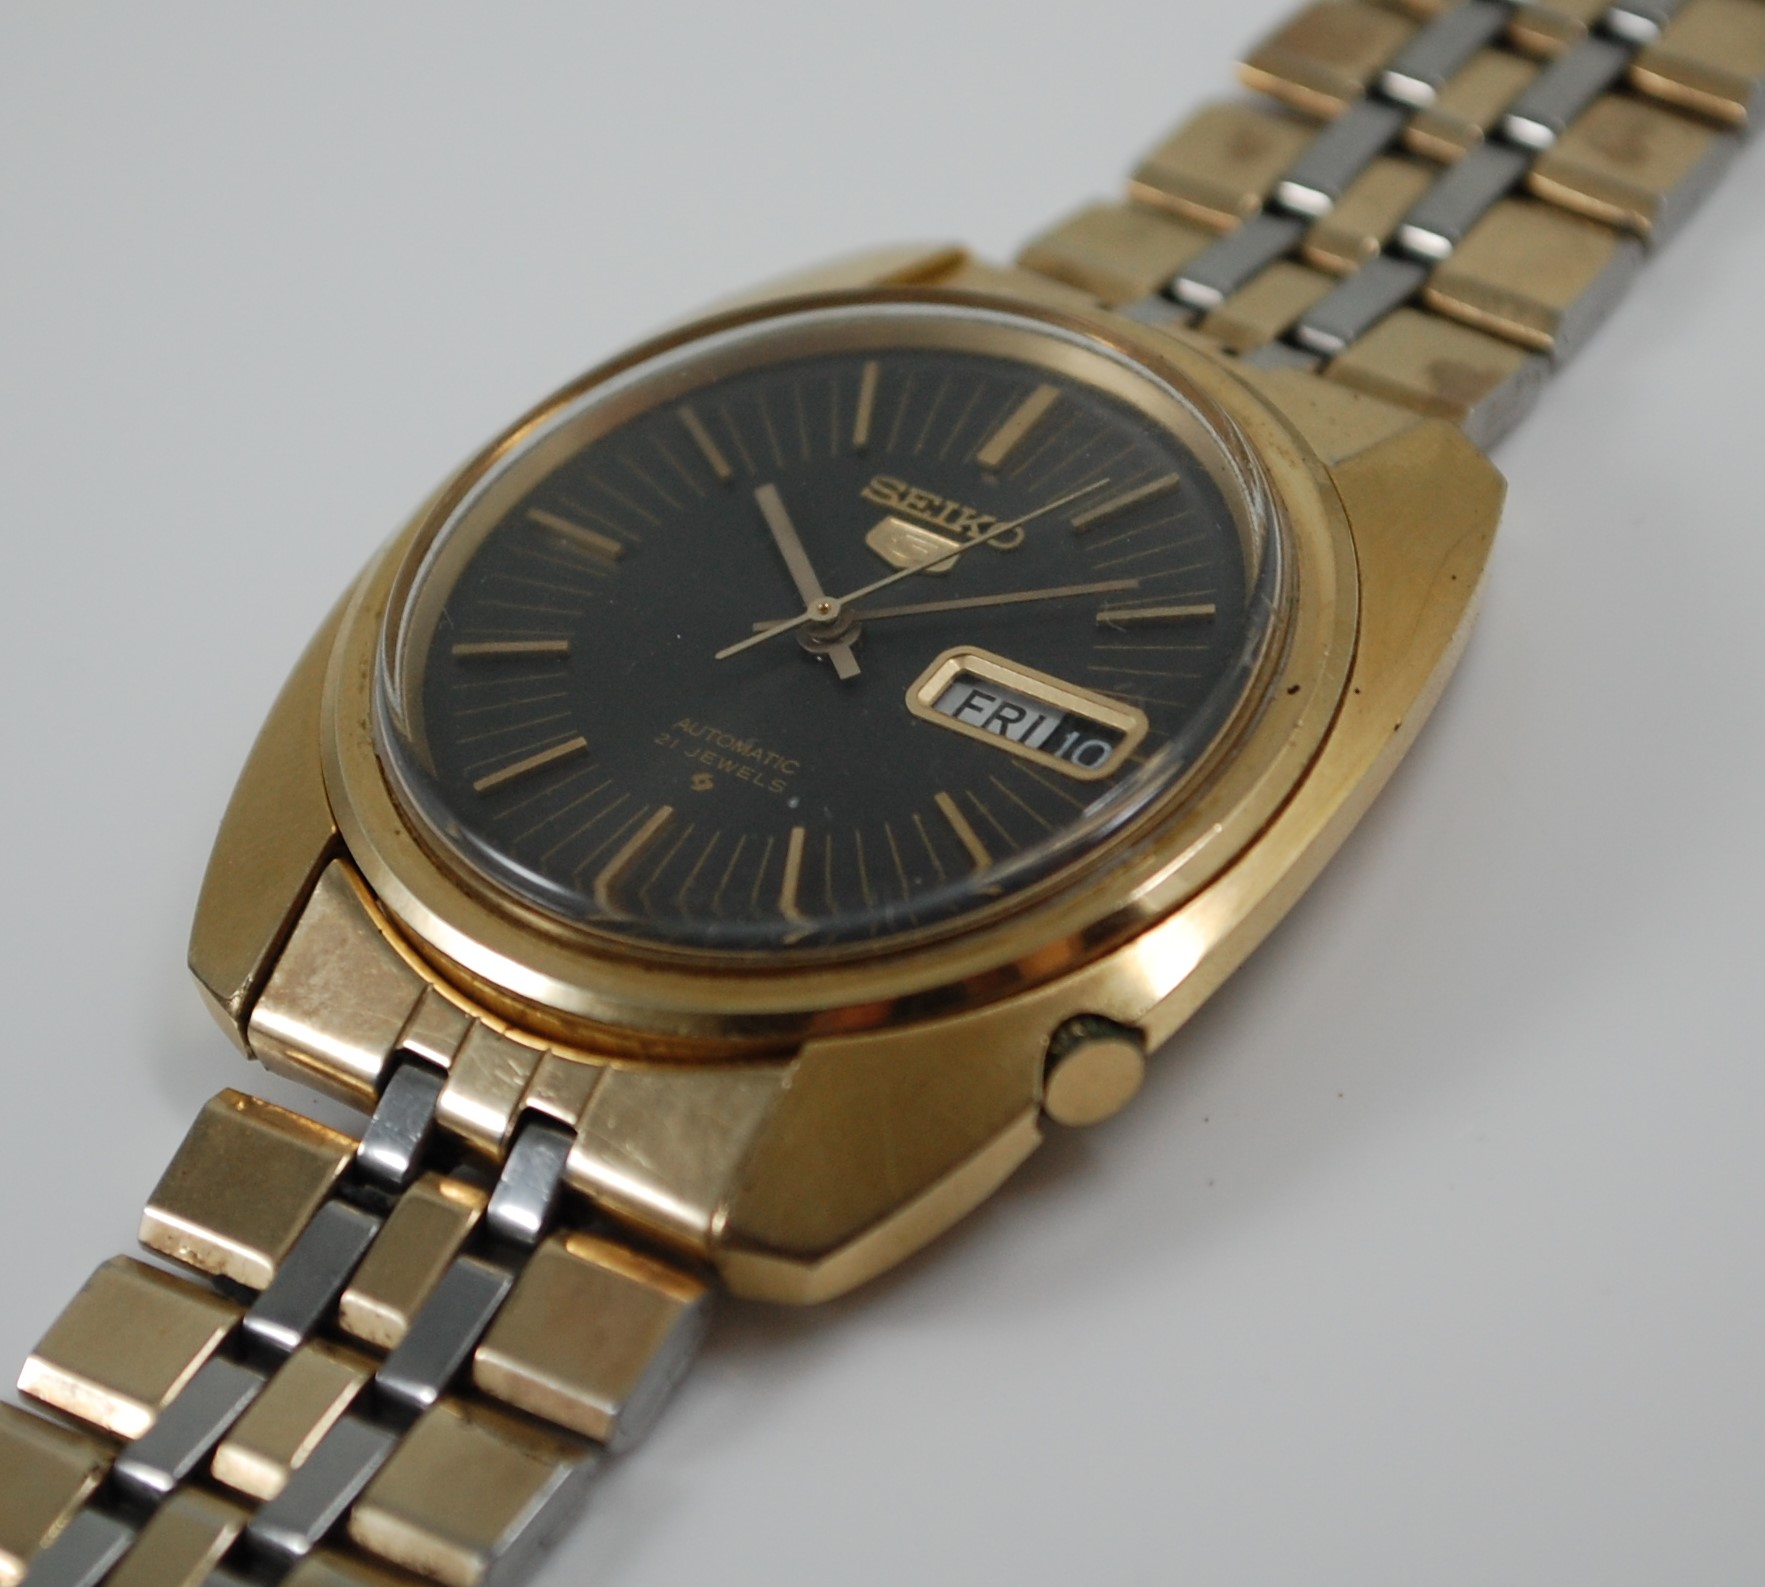 SOLD 1971 Seiko 5 Automatic 6119-8470 - Birth Year Watches